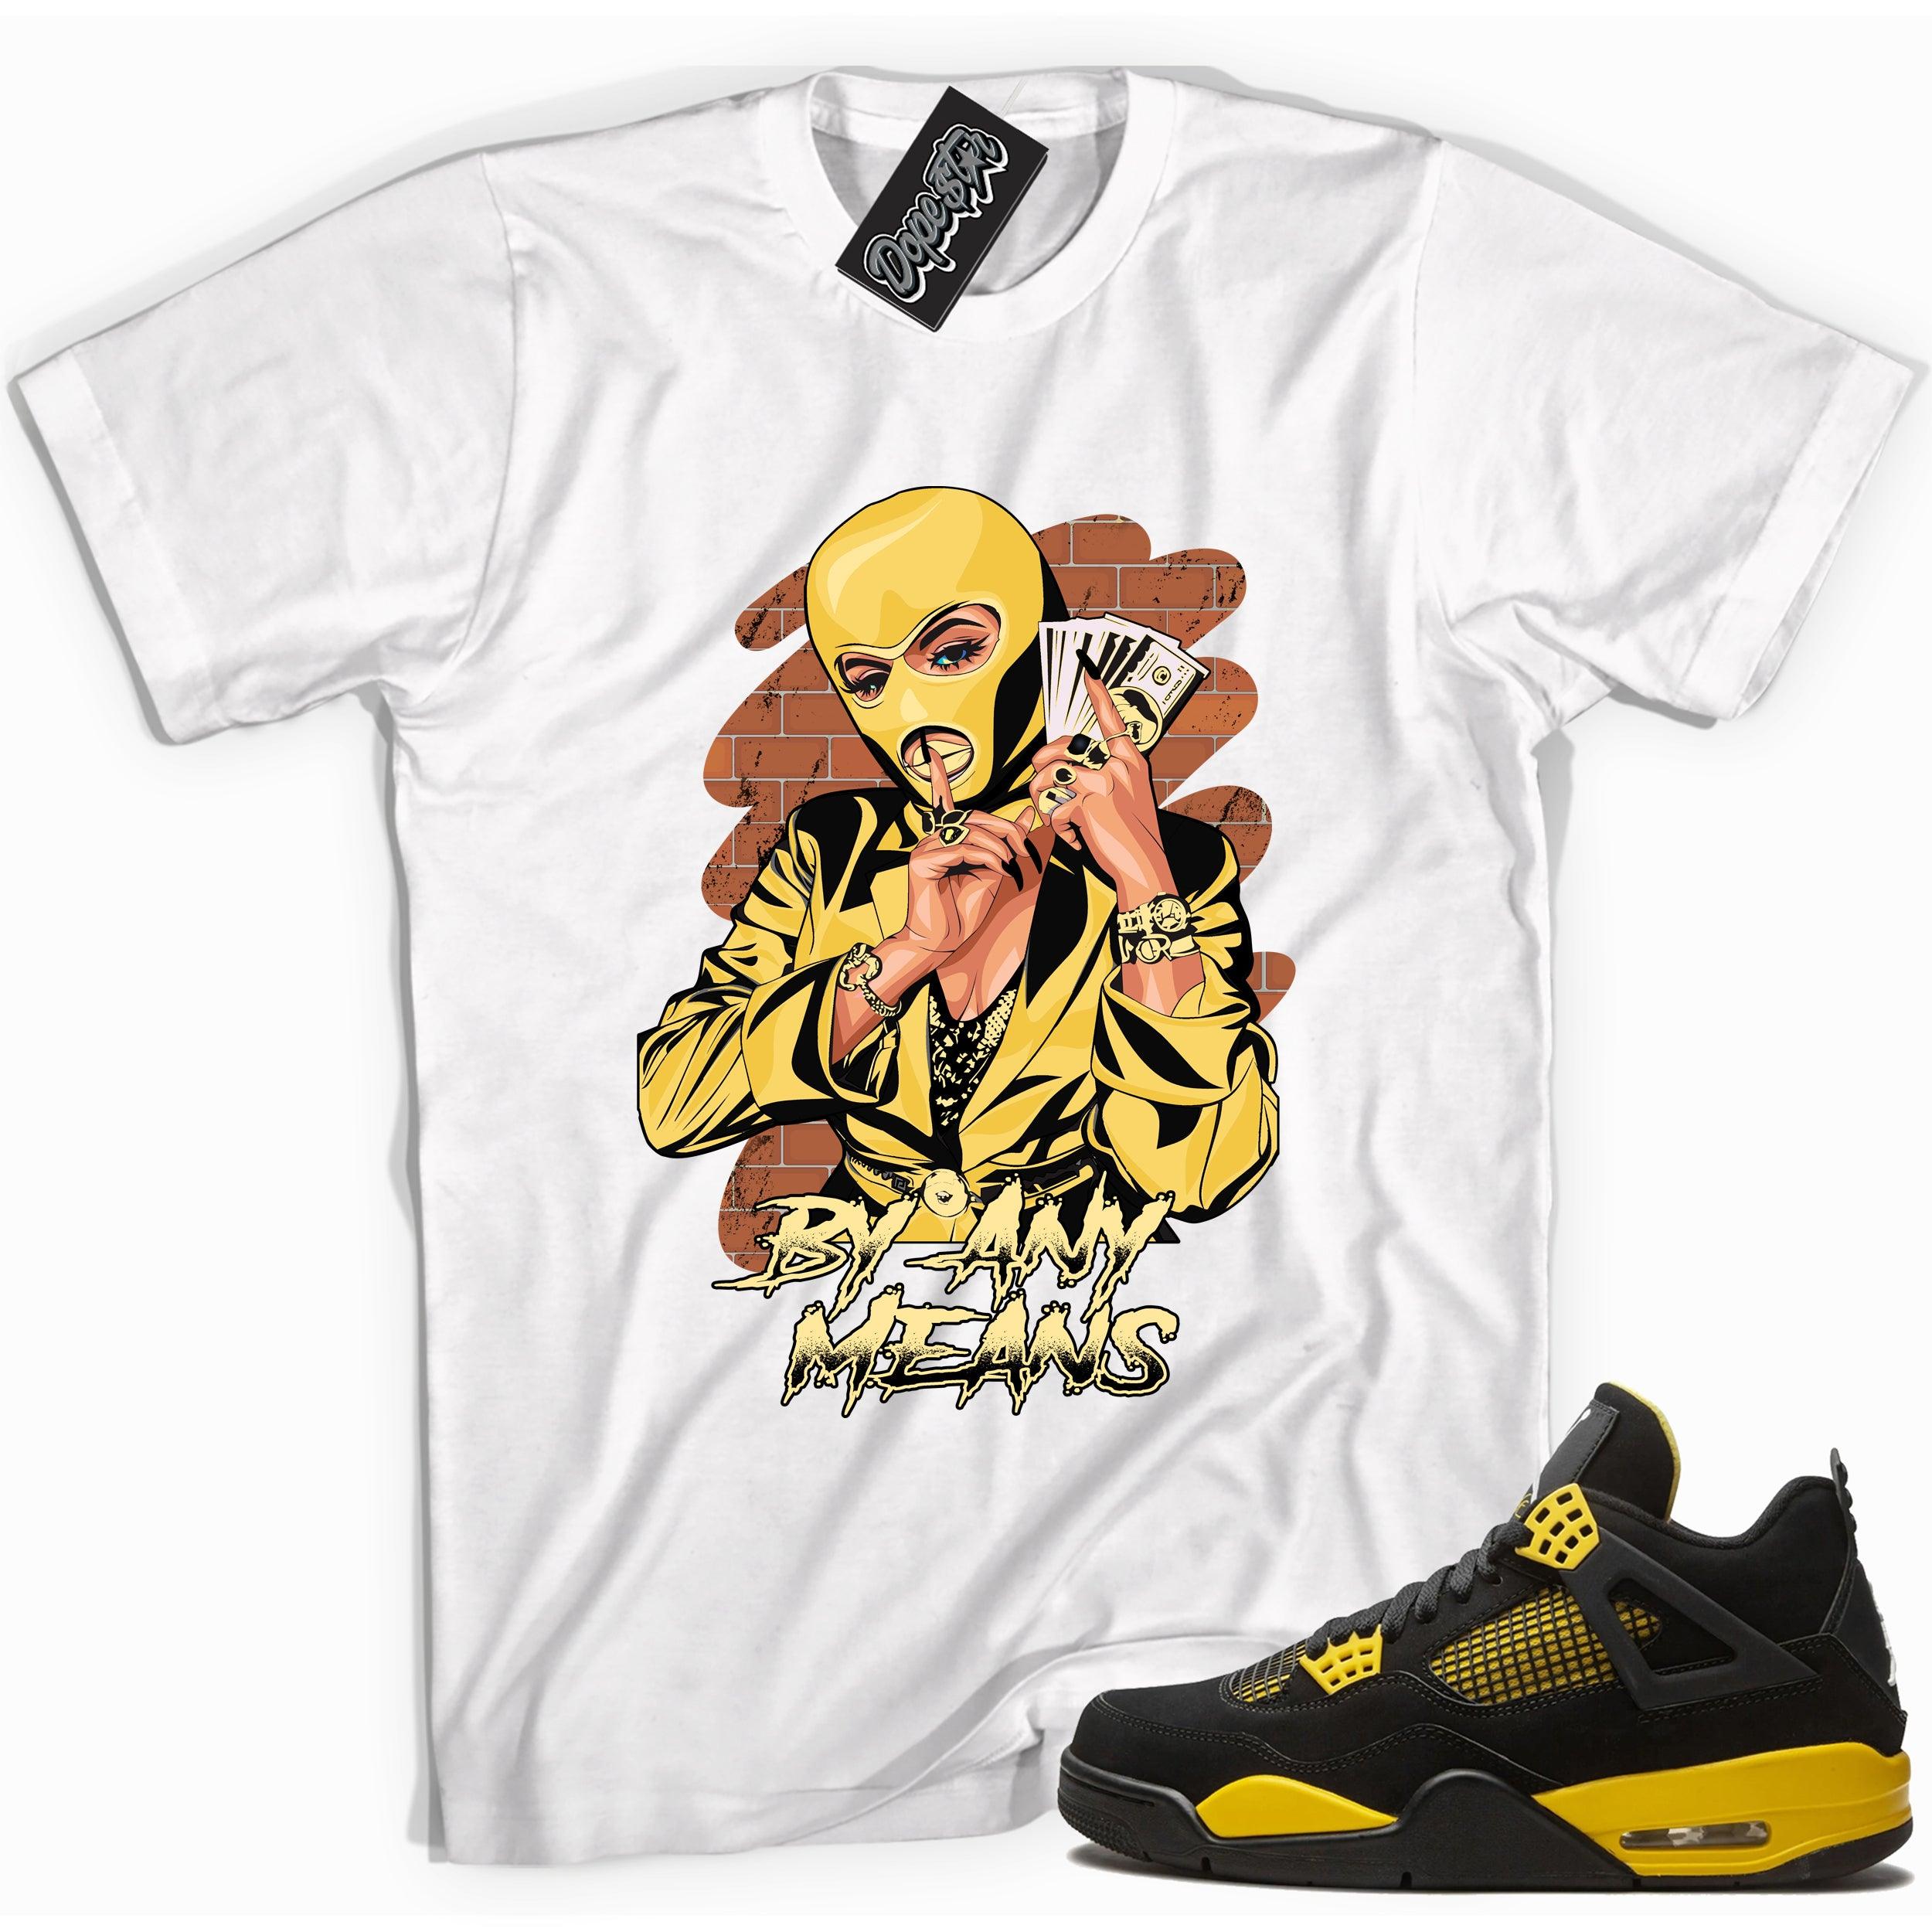 Cool whtie graphic tee with 'by any means' print, that perfectly matches Air Jordan 4 Thunder sneakers